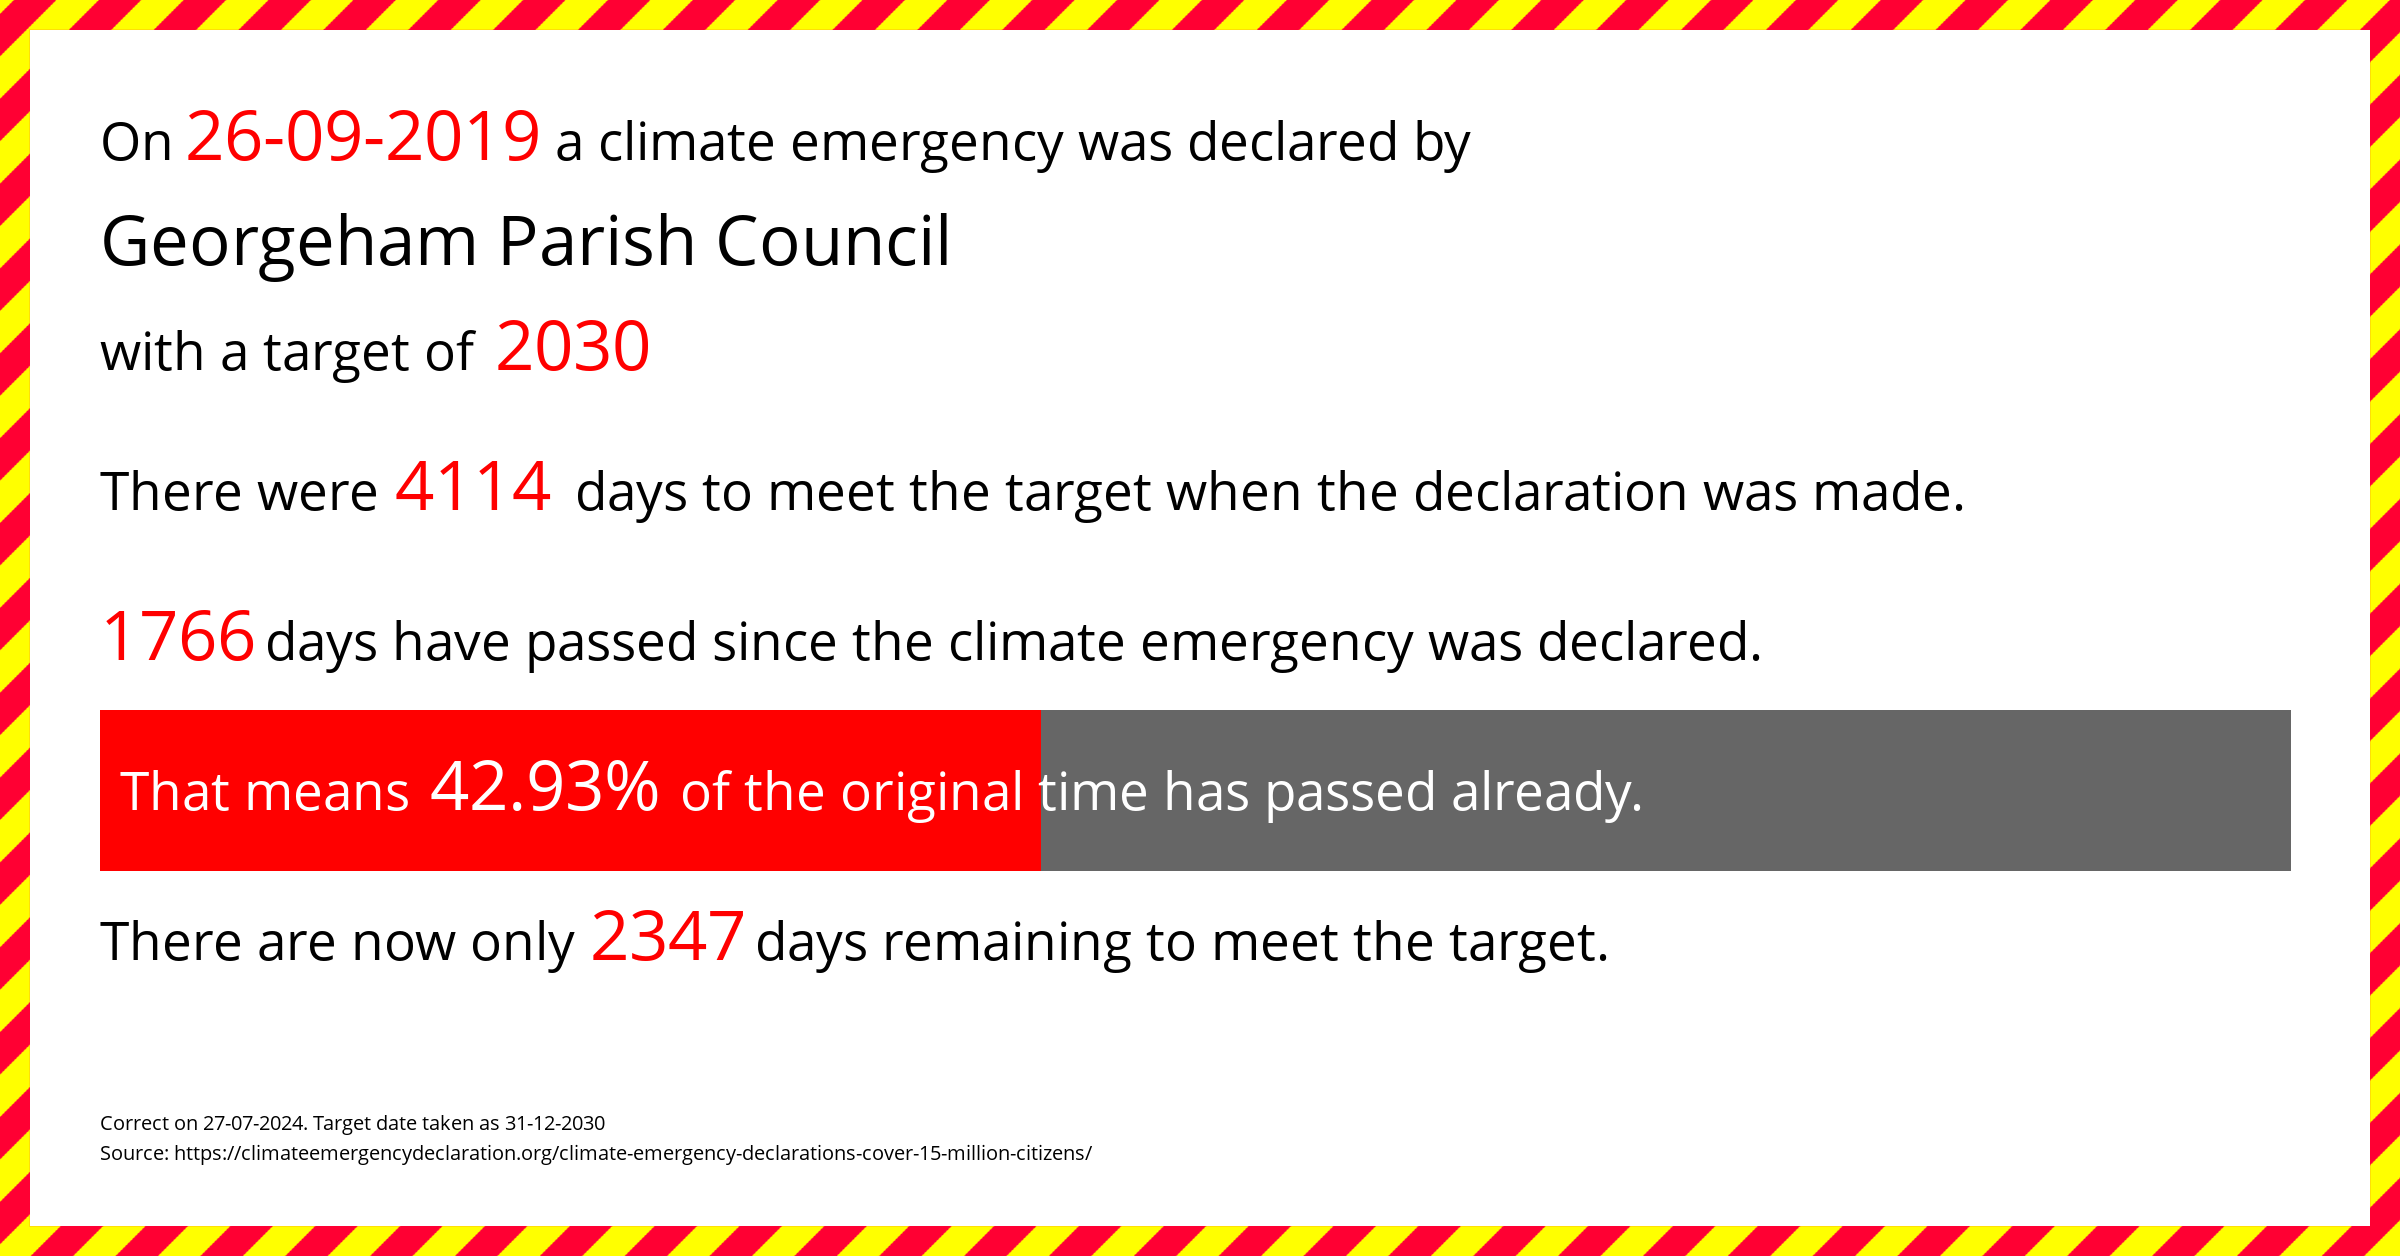 Georgeham Parish Council  declared a Climate emergency on Thursday 26th September 2019, with a target of 2030.